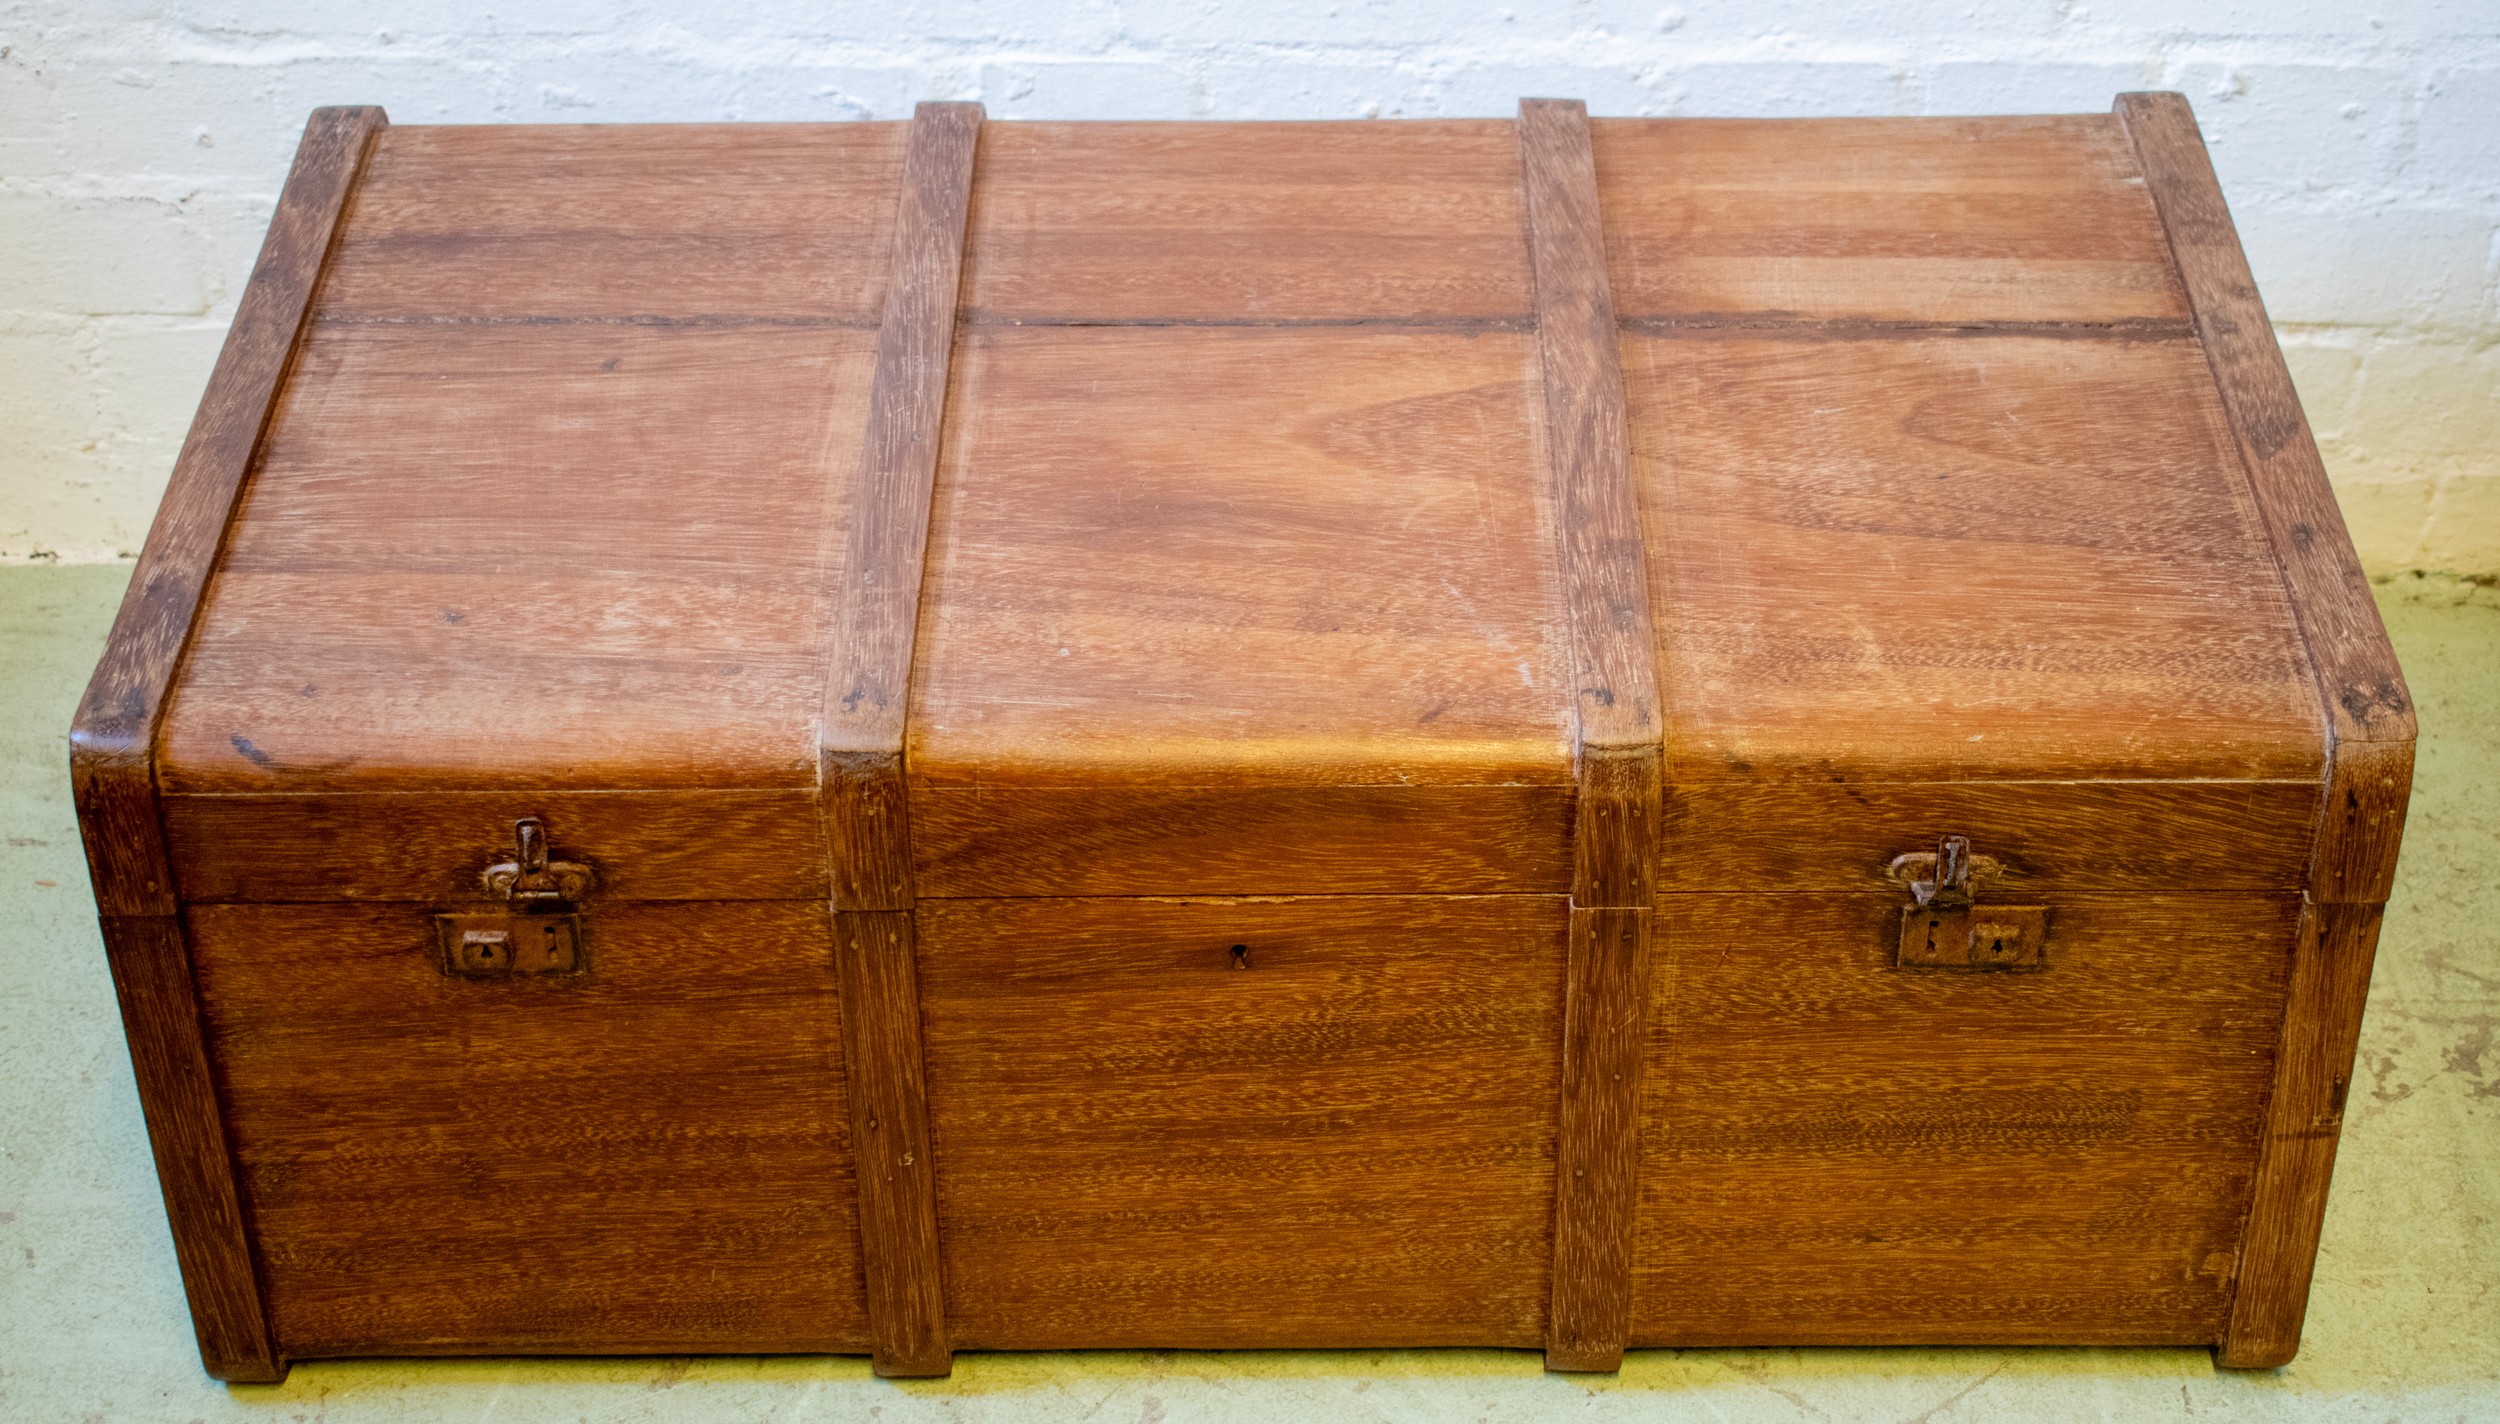 GHANA COLONIAL TRUNK, early 20th century, teak with bone and ebony inlay along with another - Image 4 of 5